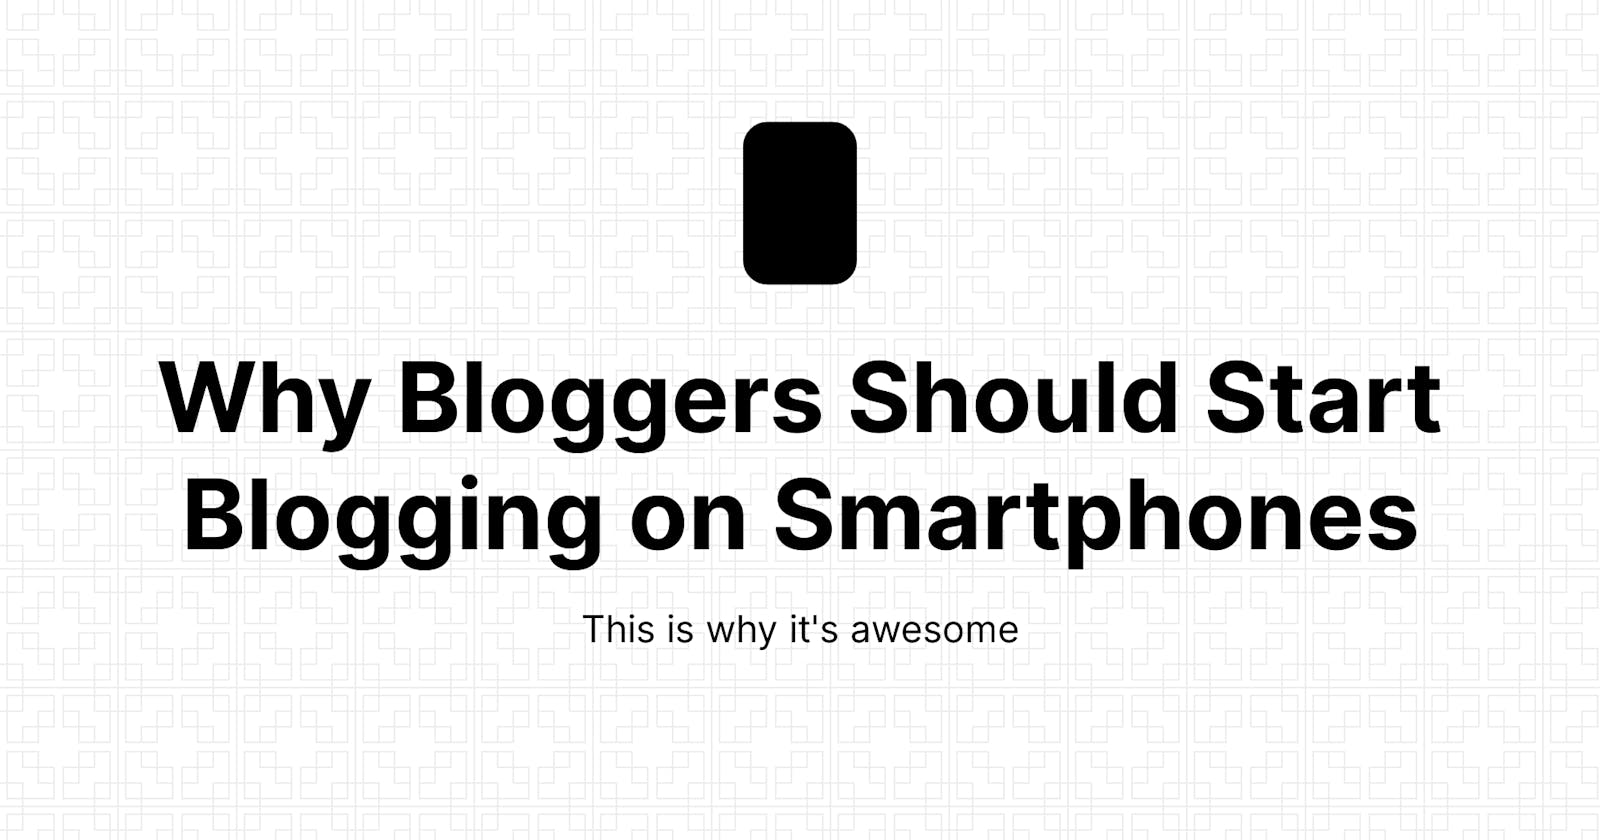 What are the benefits of Blogging on Smartphones via Native application?